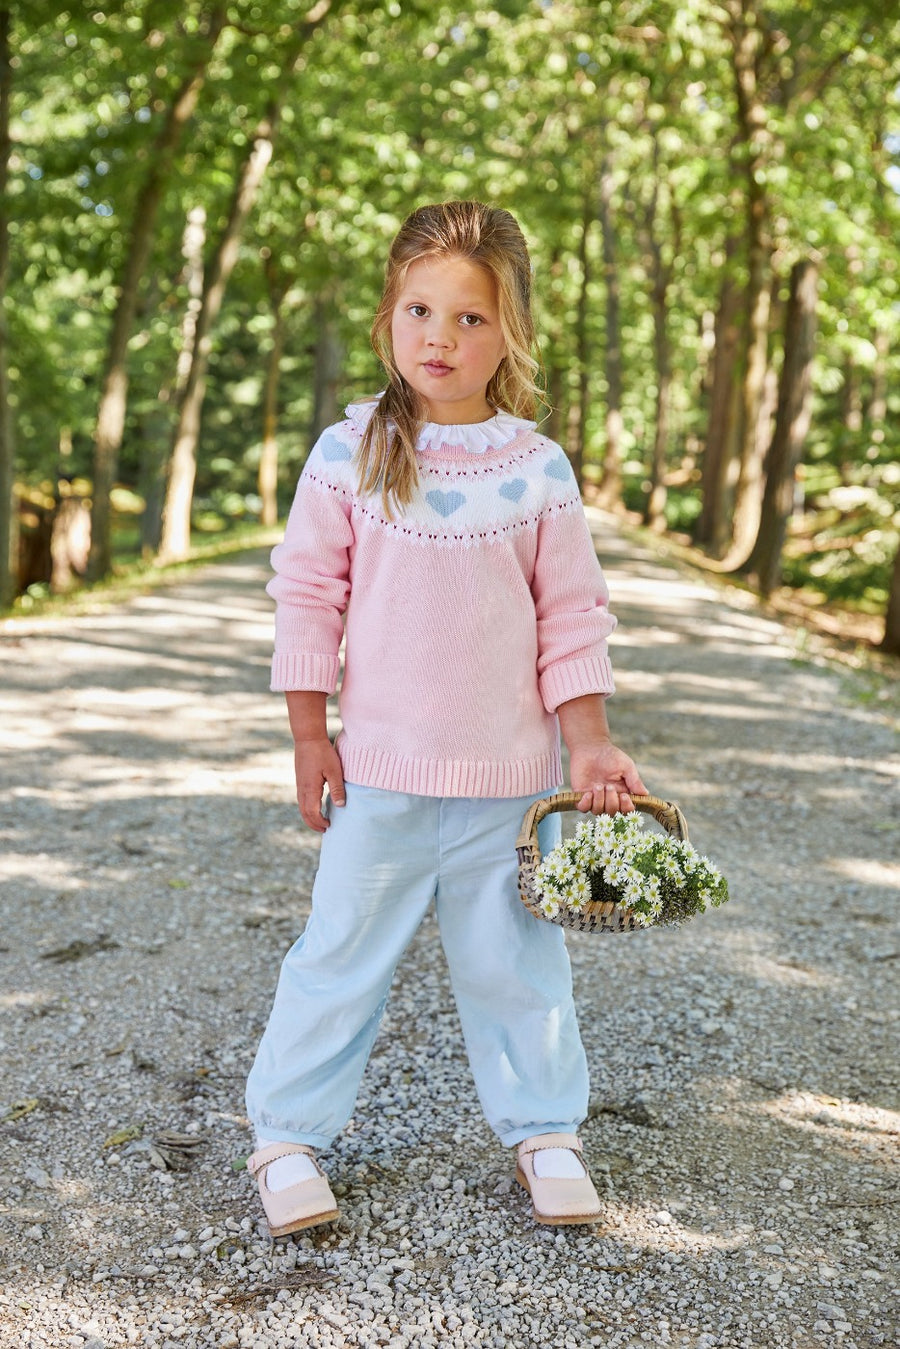 Little English traditional girl's clothing, classic corduroy pant in light blue for girl